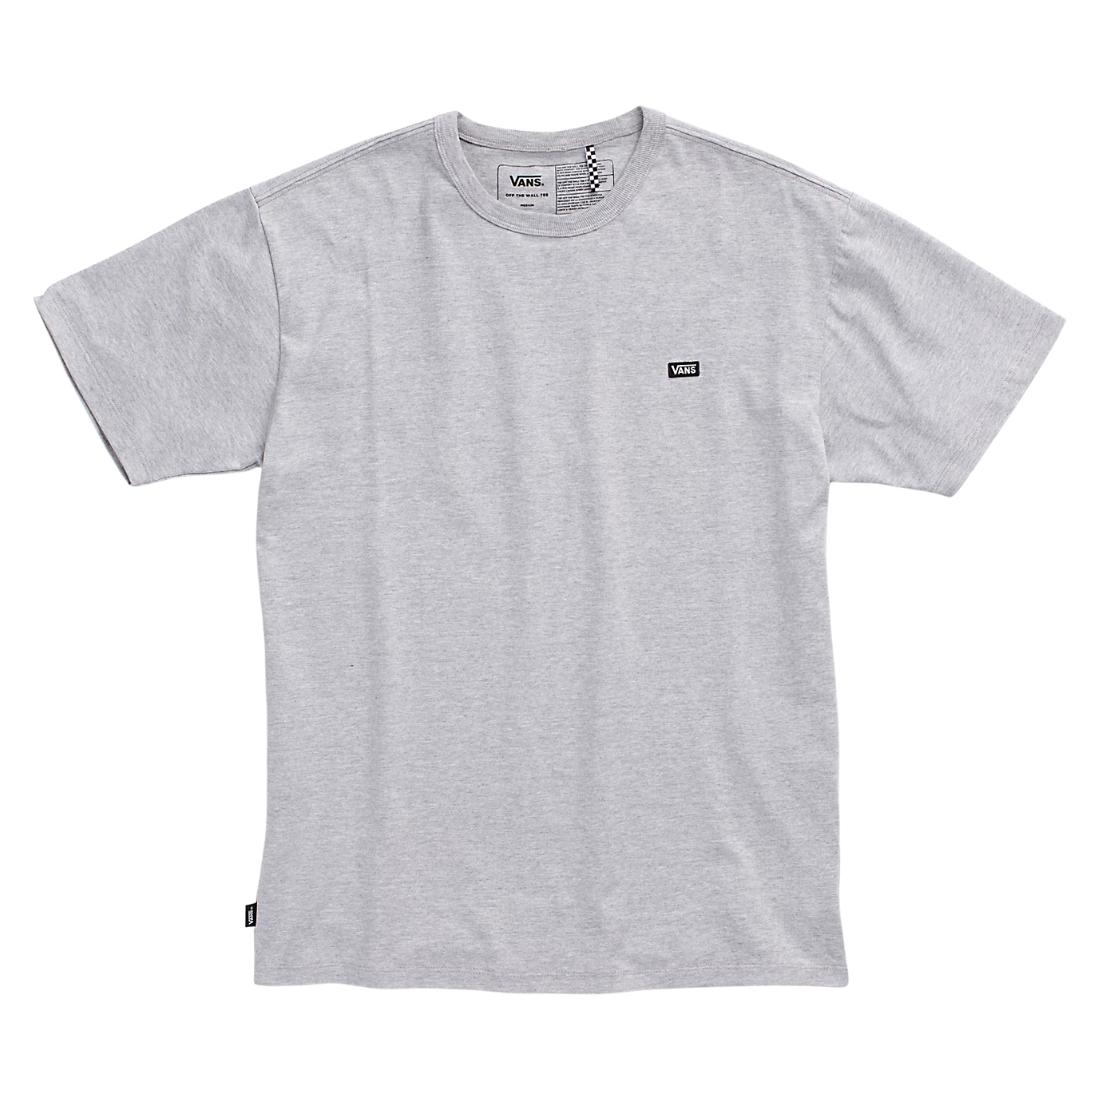 Vans Off The Wall Classic T-Shirt - Athletic Heather - Mens Plain T-Shirt by Vans